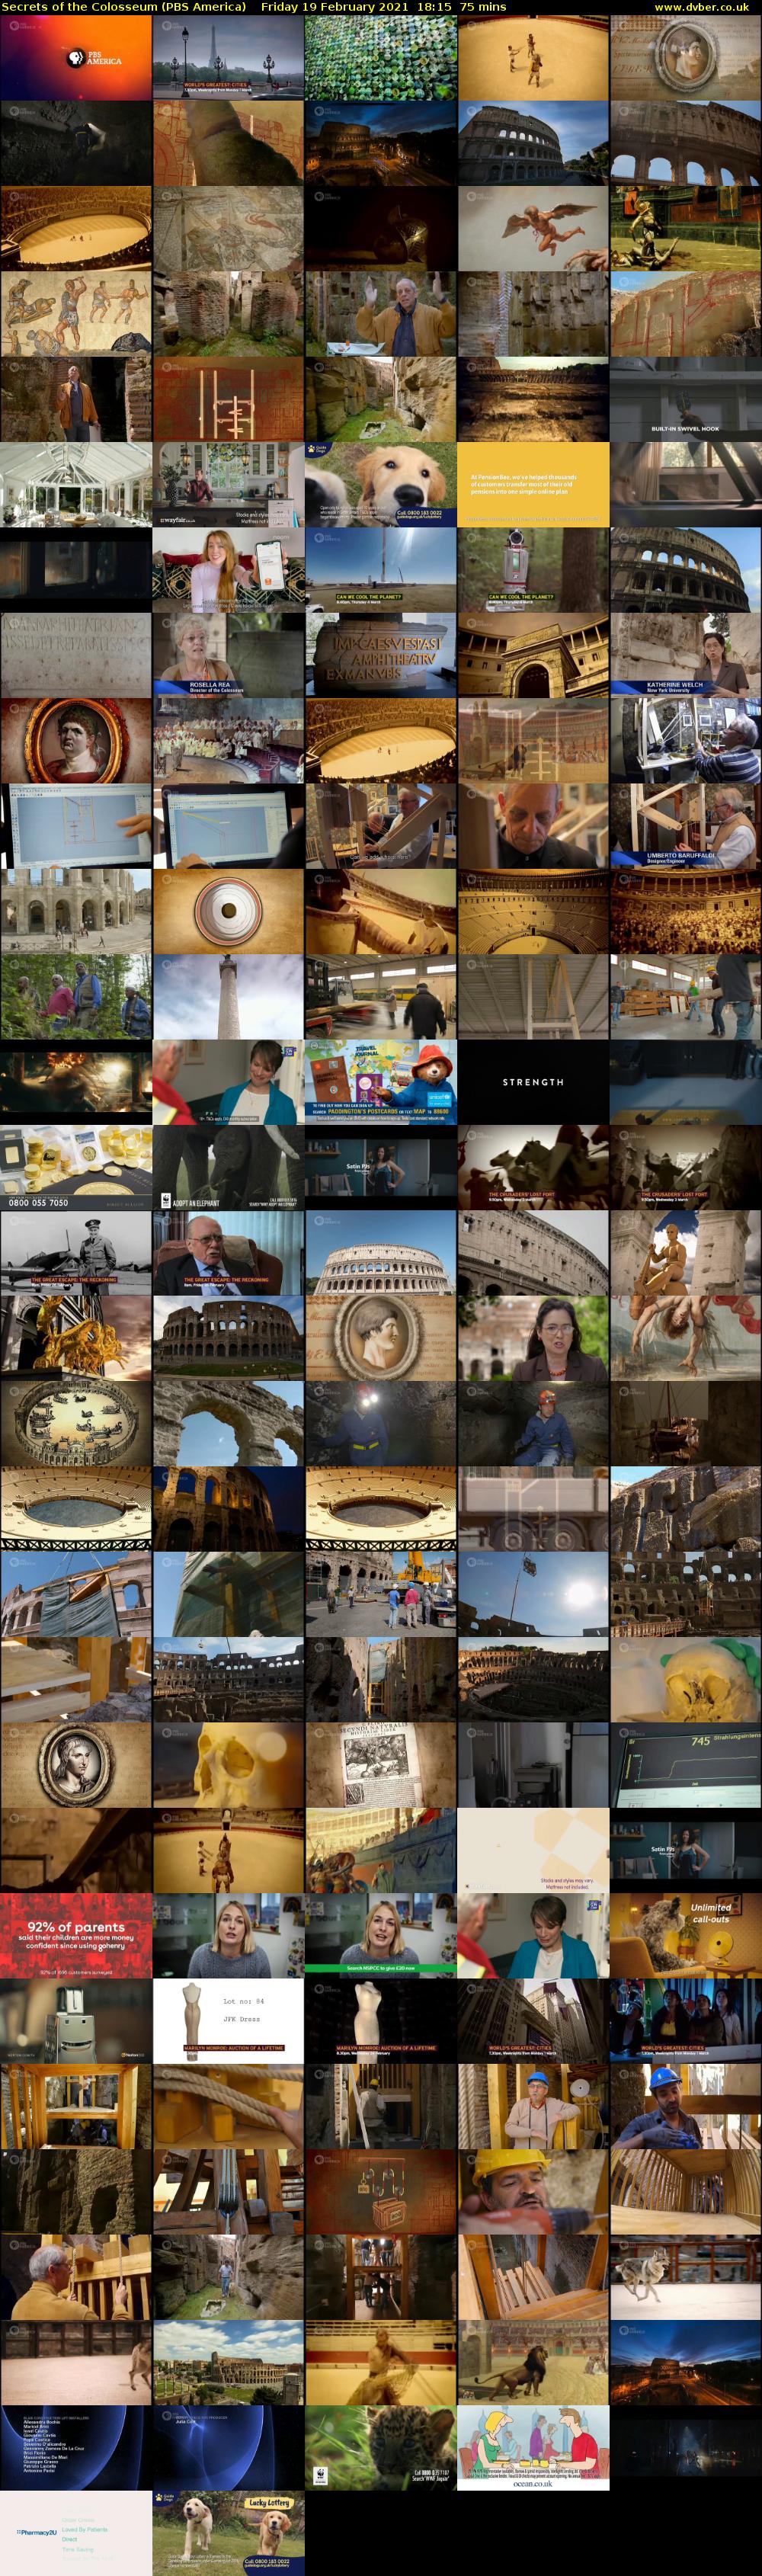 Secrets of the Colosseum (PBS America) Friday 19 February 2021 18:15 - 19:30